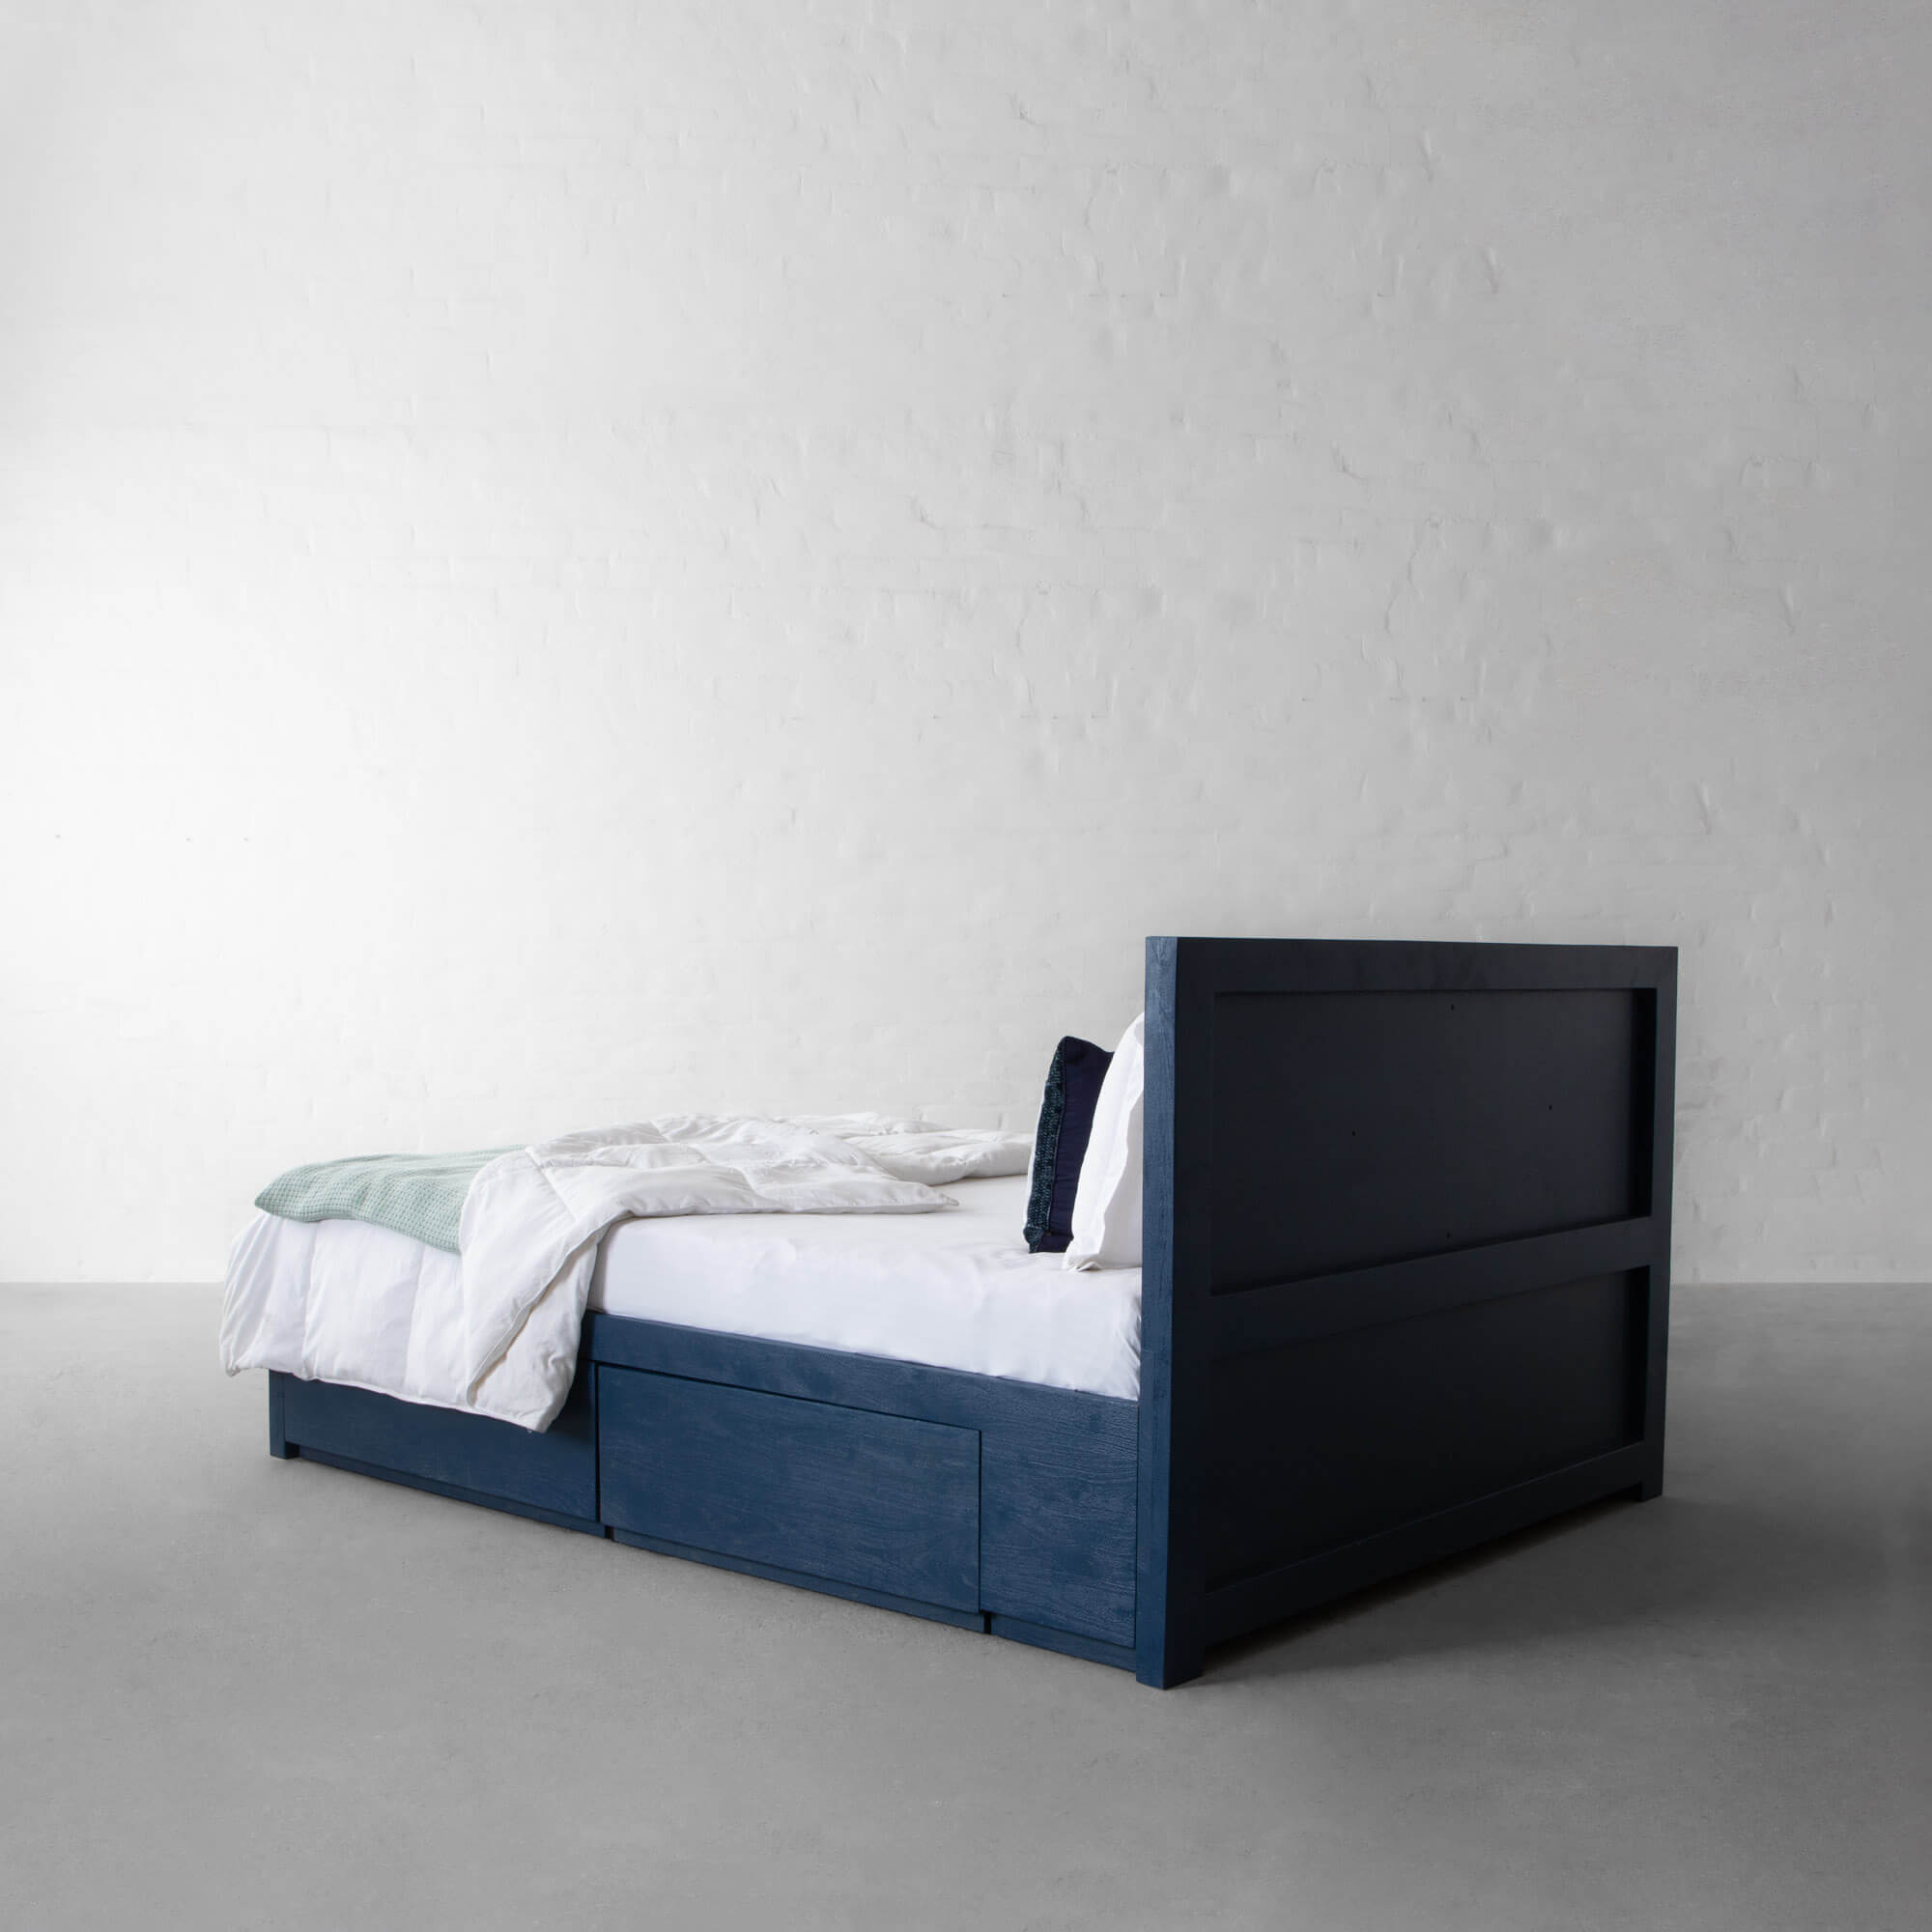 Lyon French Bed Collection with Drawer Storage (QUEEN SIZE)